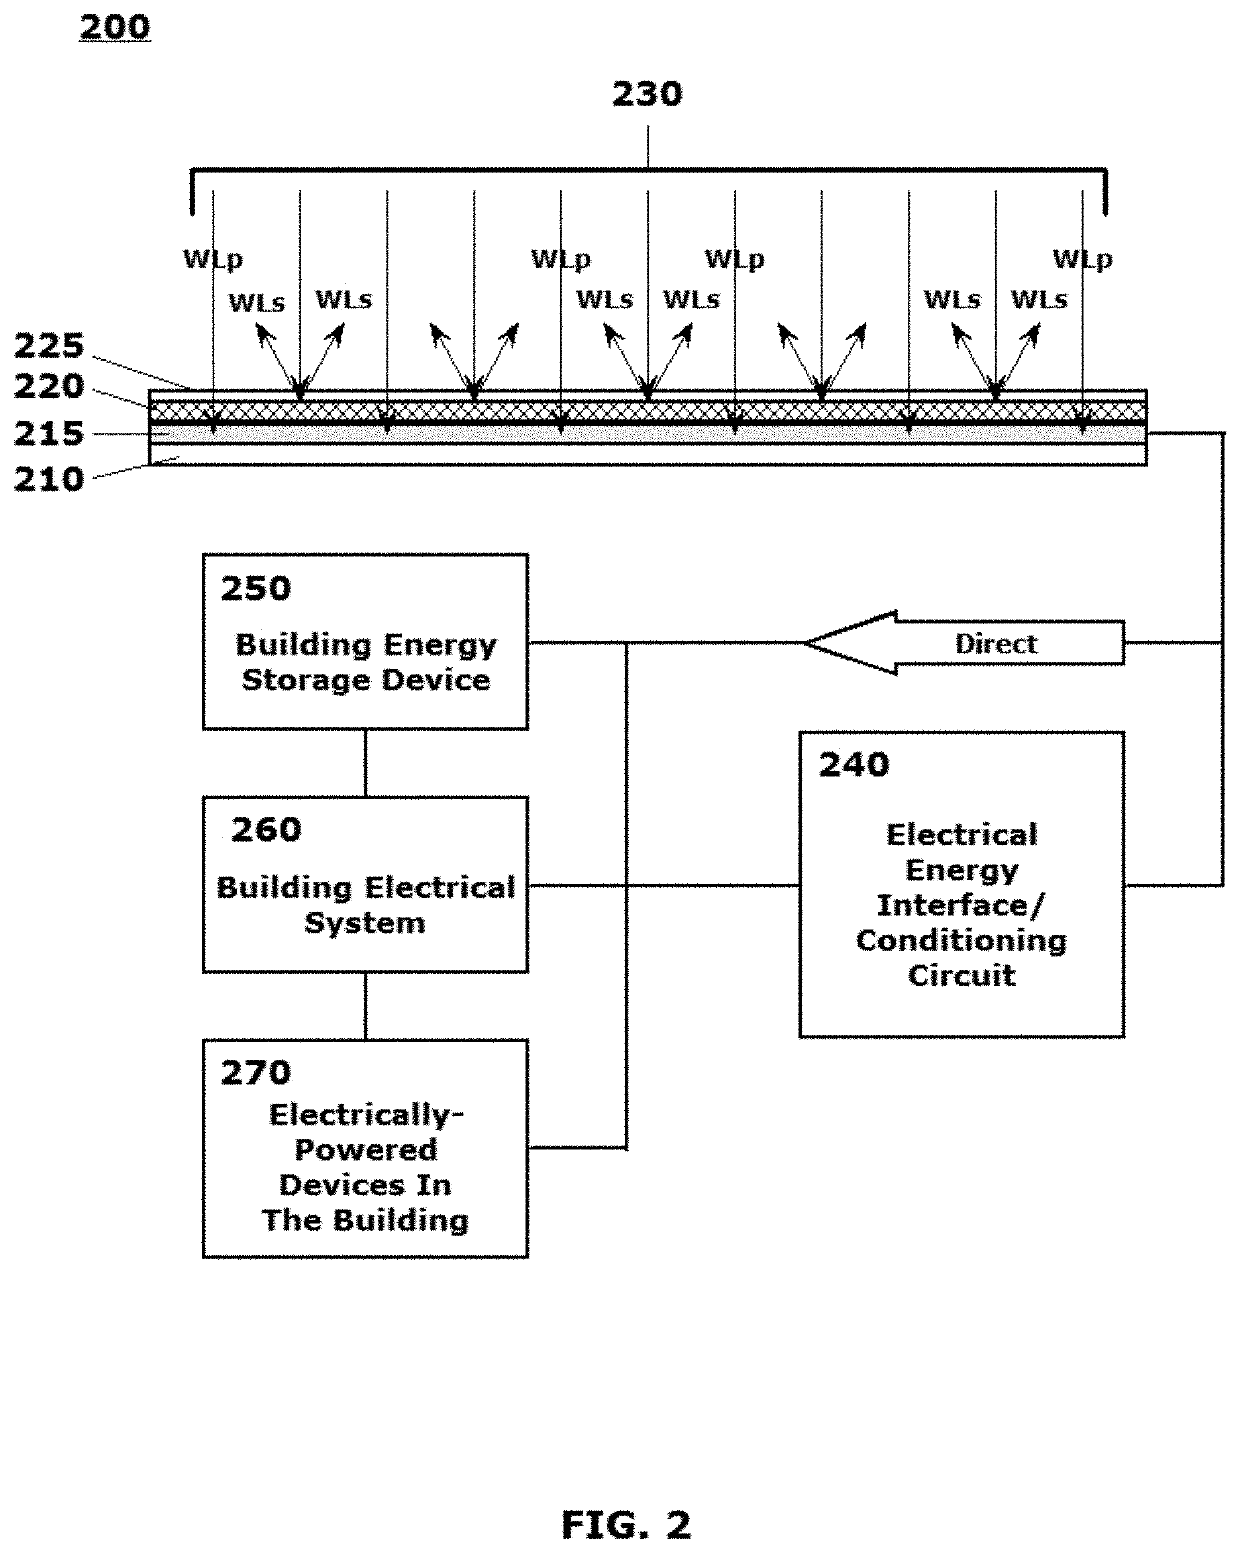 Energy harvesting systems for providing autonomous electrical power to building structures and electrically-powered devices in the building structures